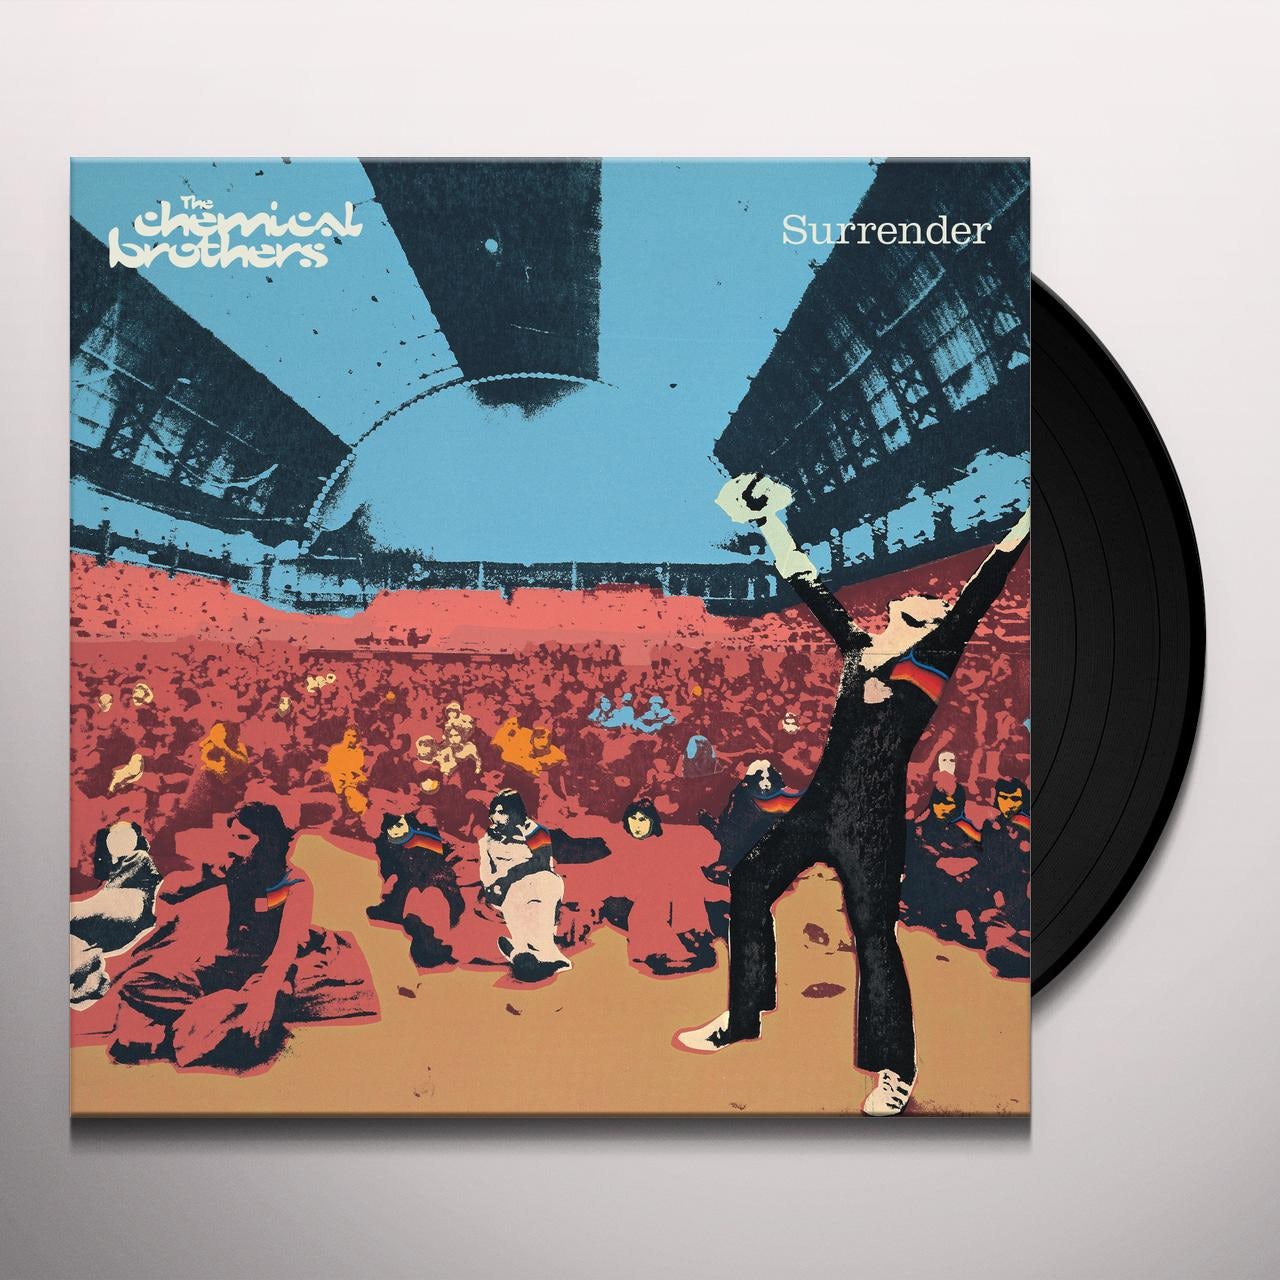 The Chemical Brothers - Surrender (2LP Gatefold Sleeve)